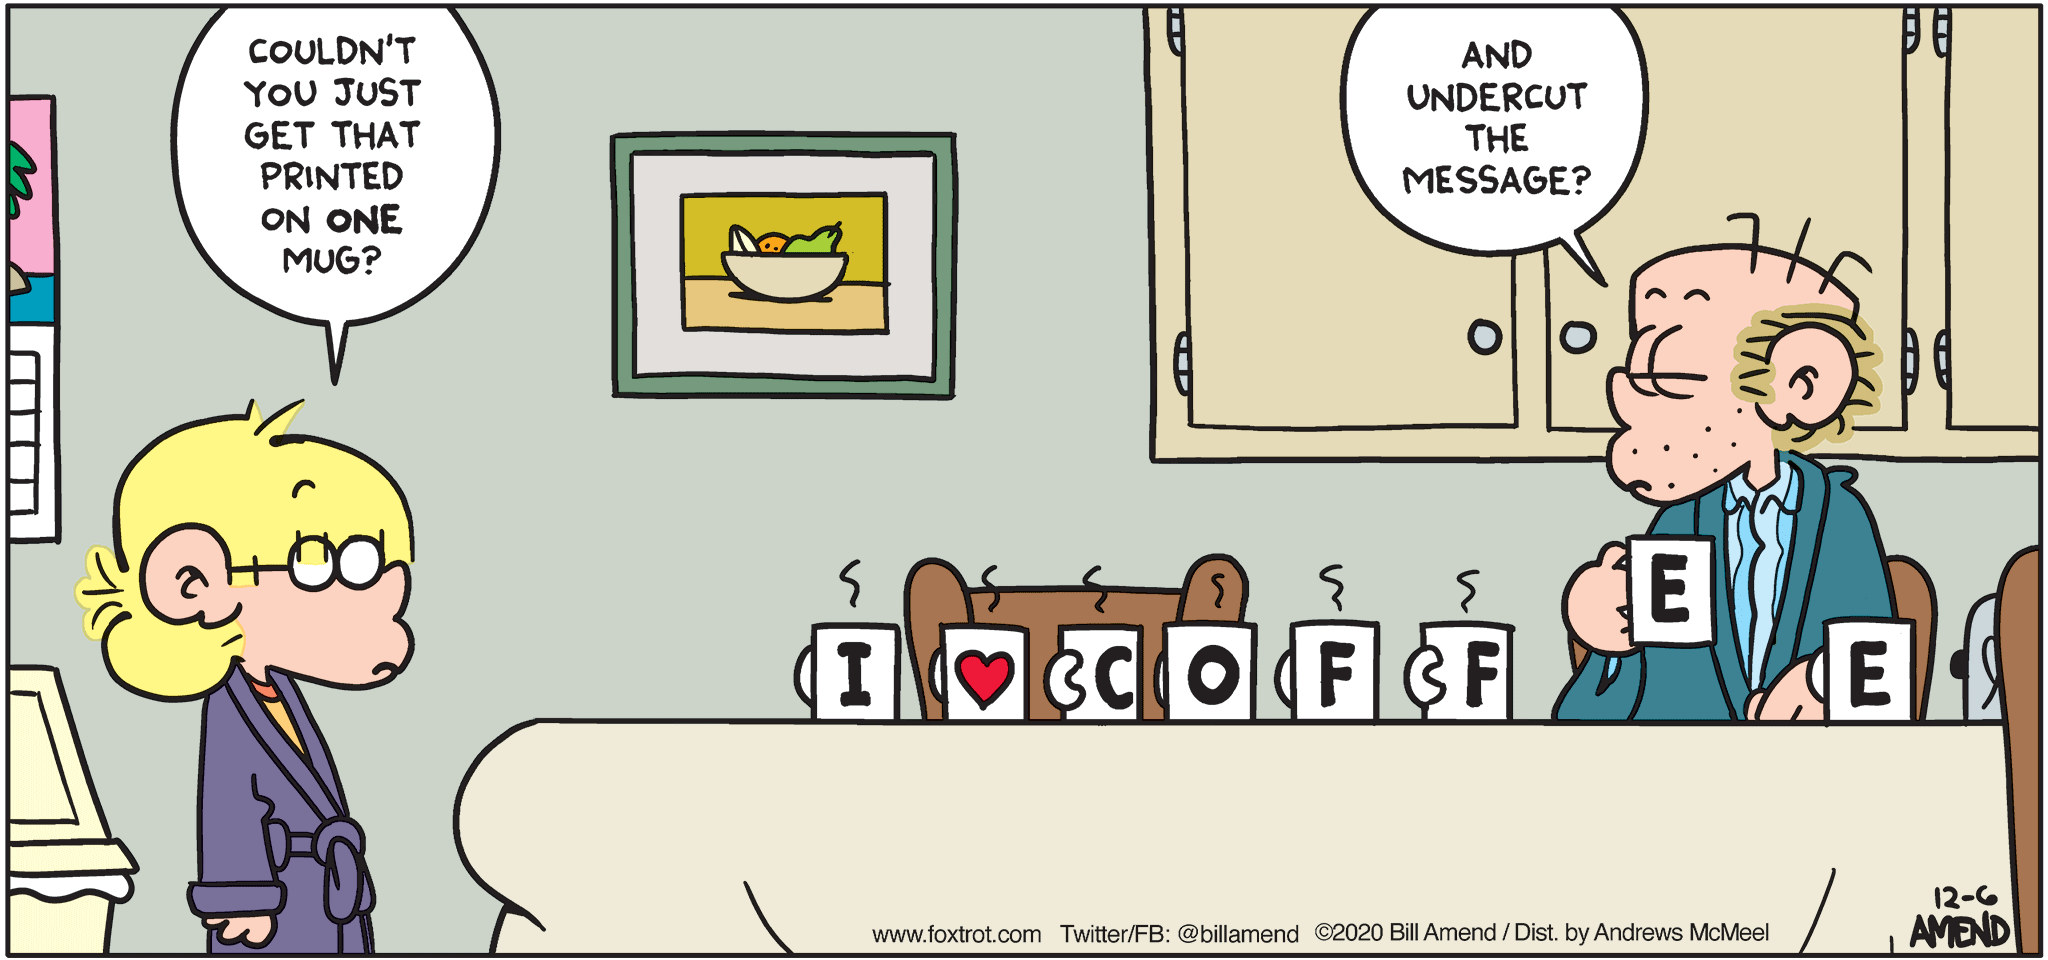 FoxTrot comic strip by Bill Amend - "Coffee <3" published December 6, 2020 - Jason: Couldn't you just get that printed on one mug? Roger: And undercut the message?